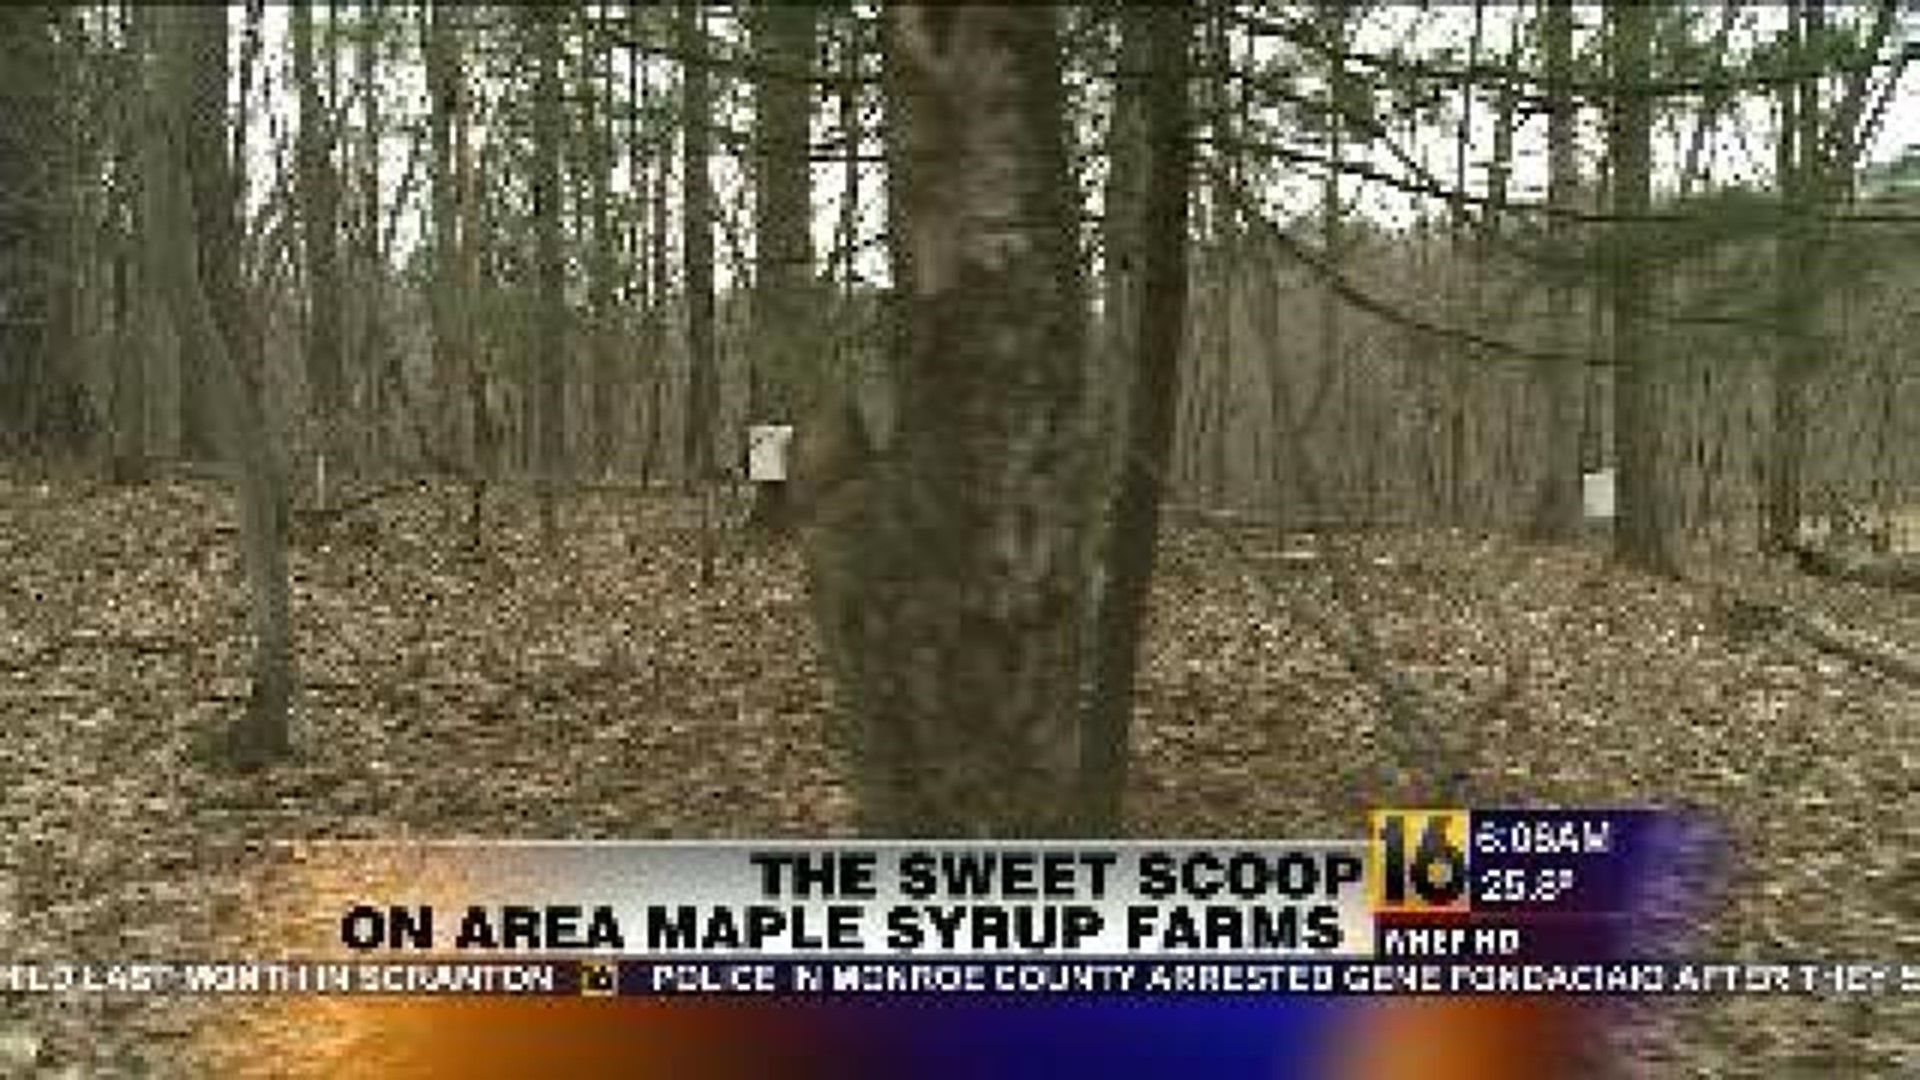 The Sweet Scoop on Maple Syrup Farms